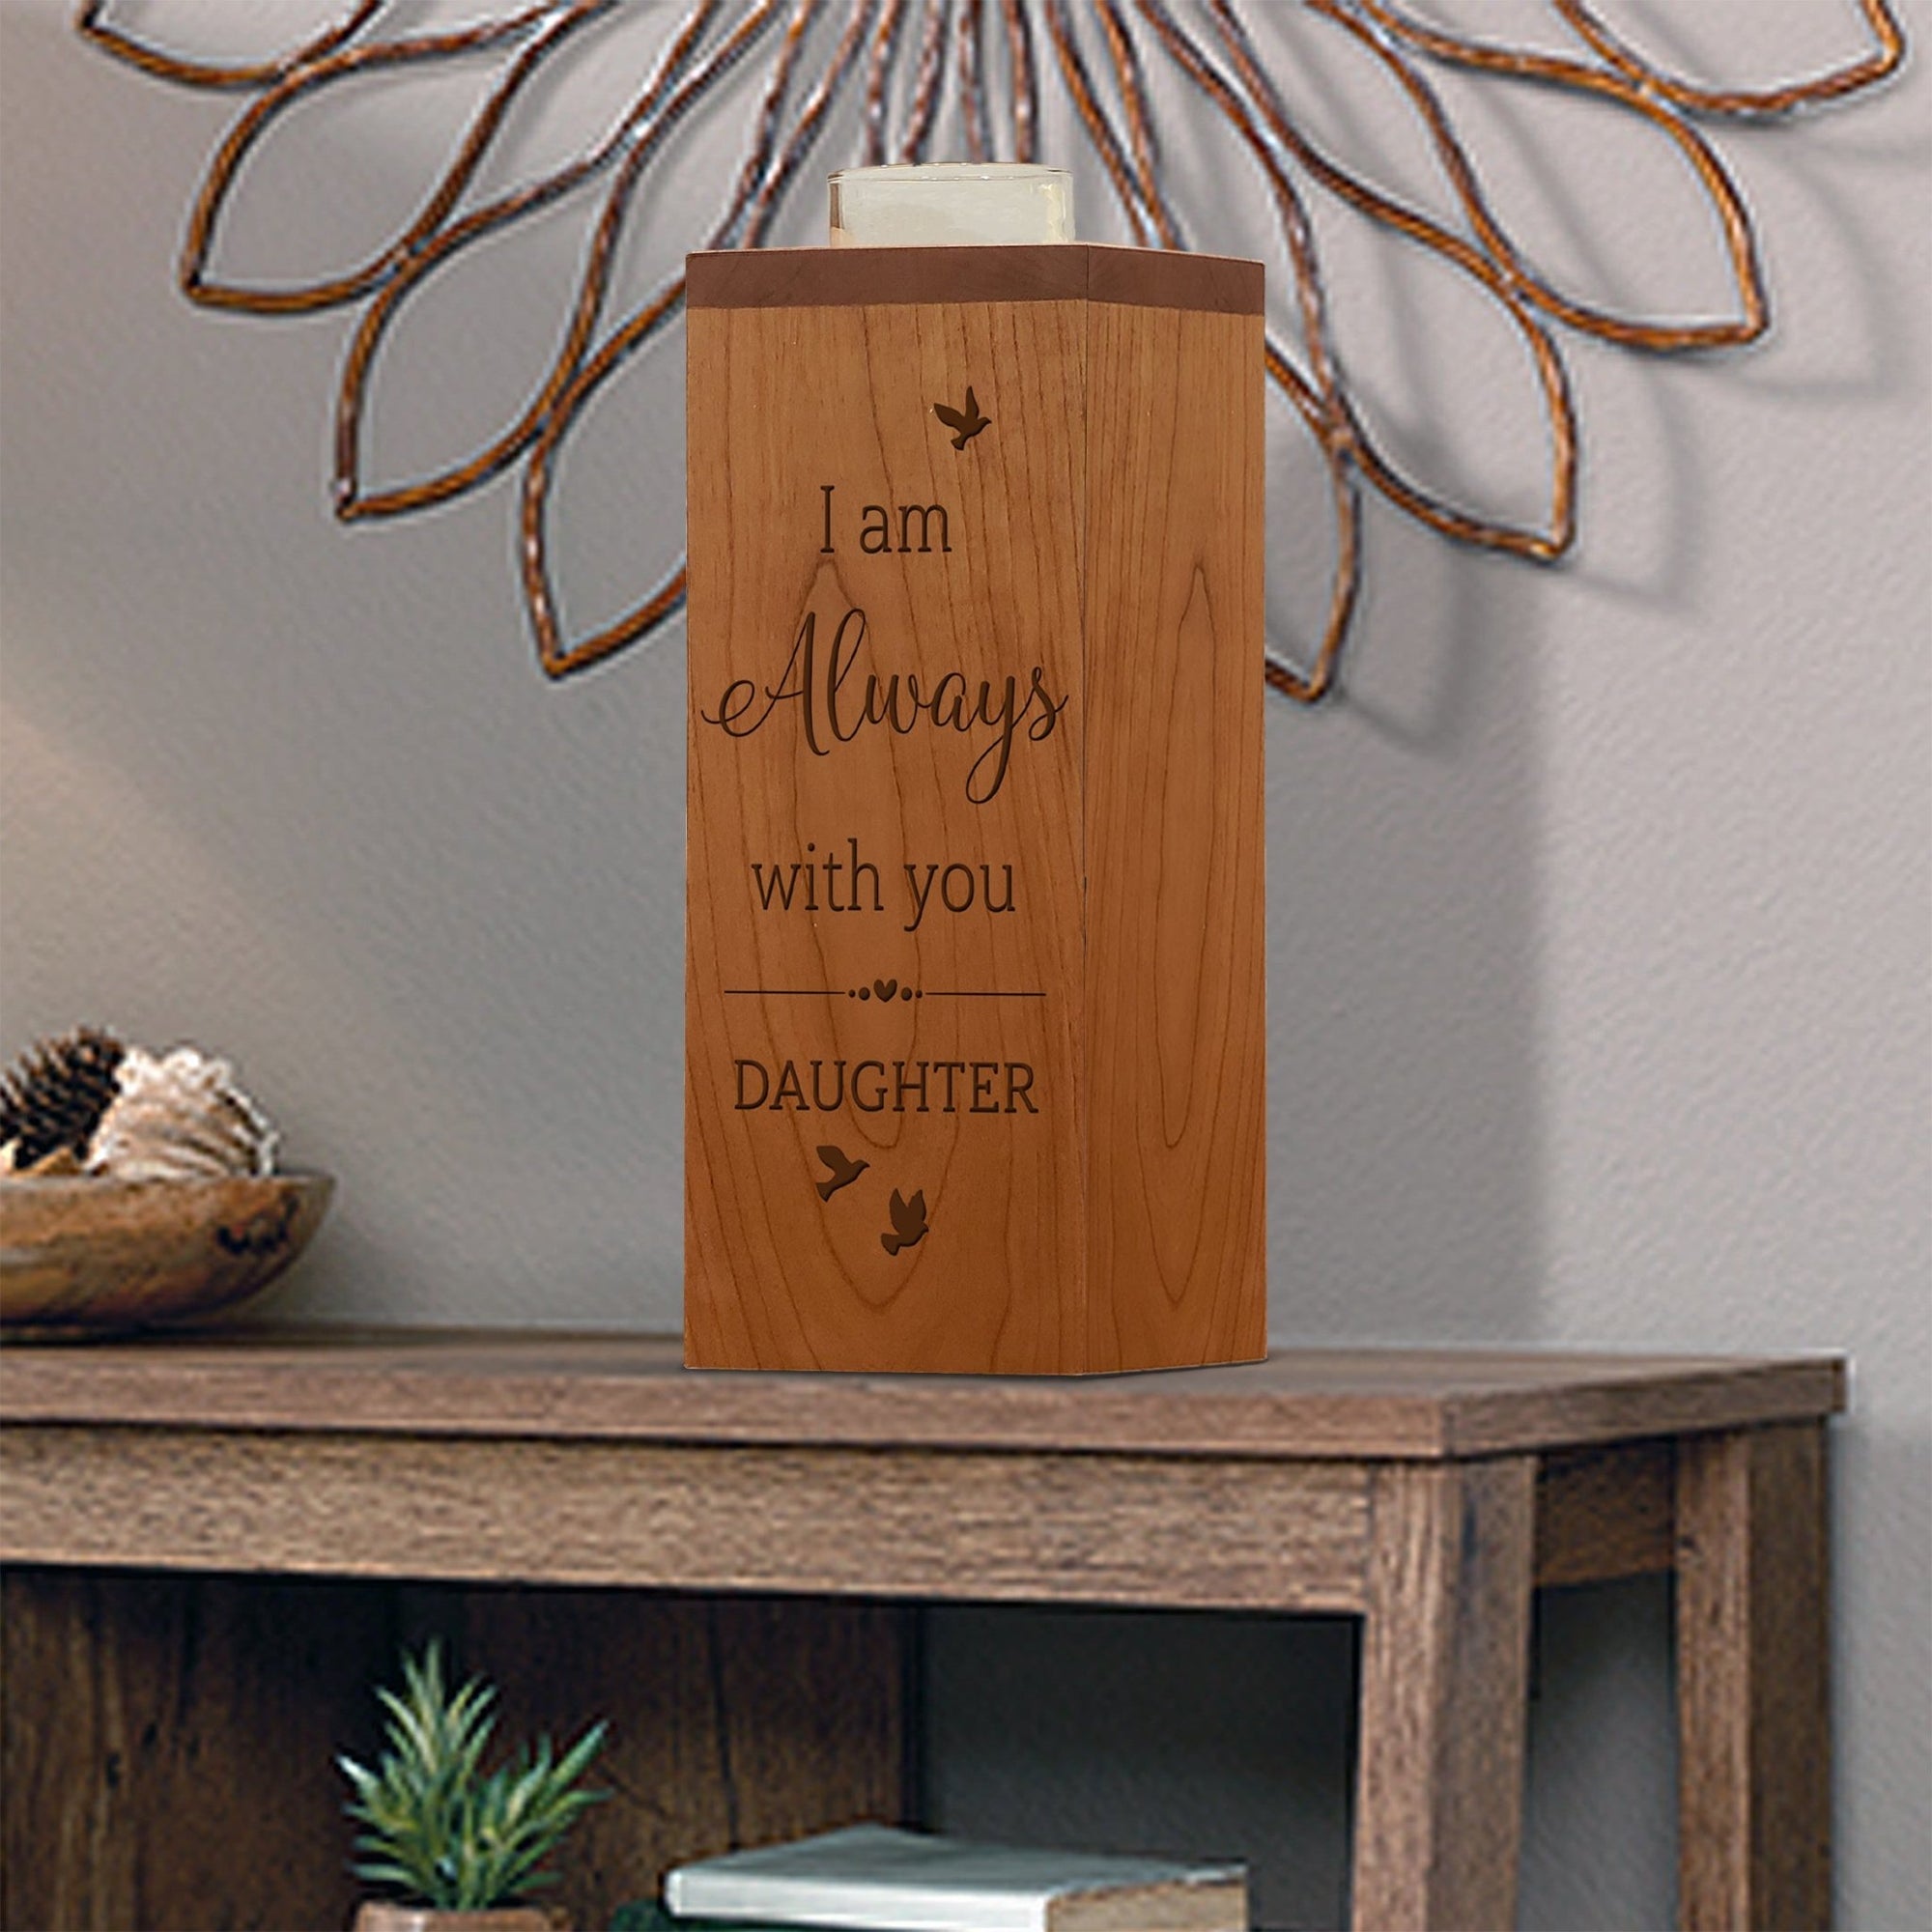 Cozy Cardinal Memorial Vertical Urns With Single Candle Holder For Human Ashes - I Am Always Daughter - LifeSong Milestones